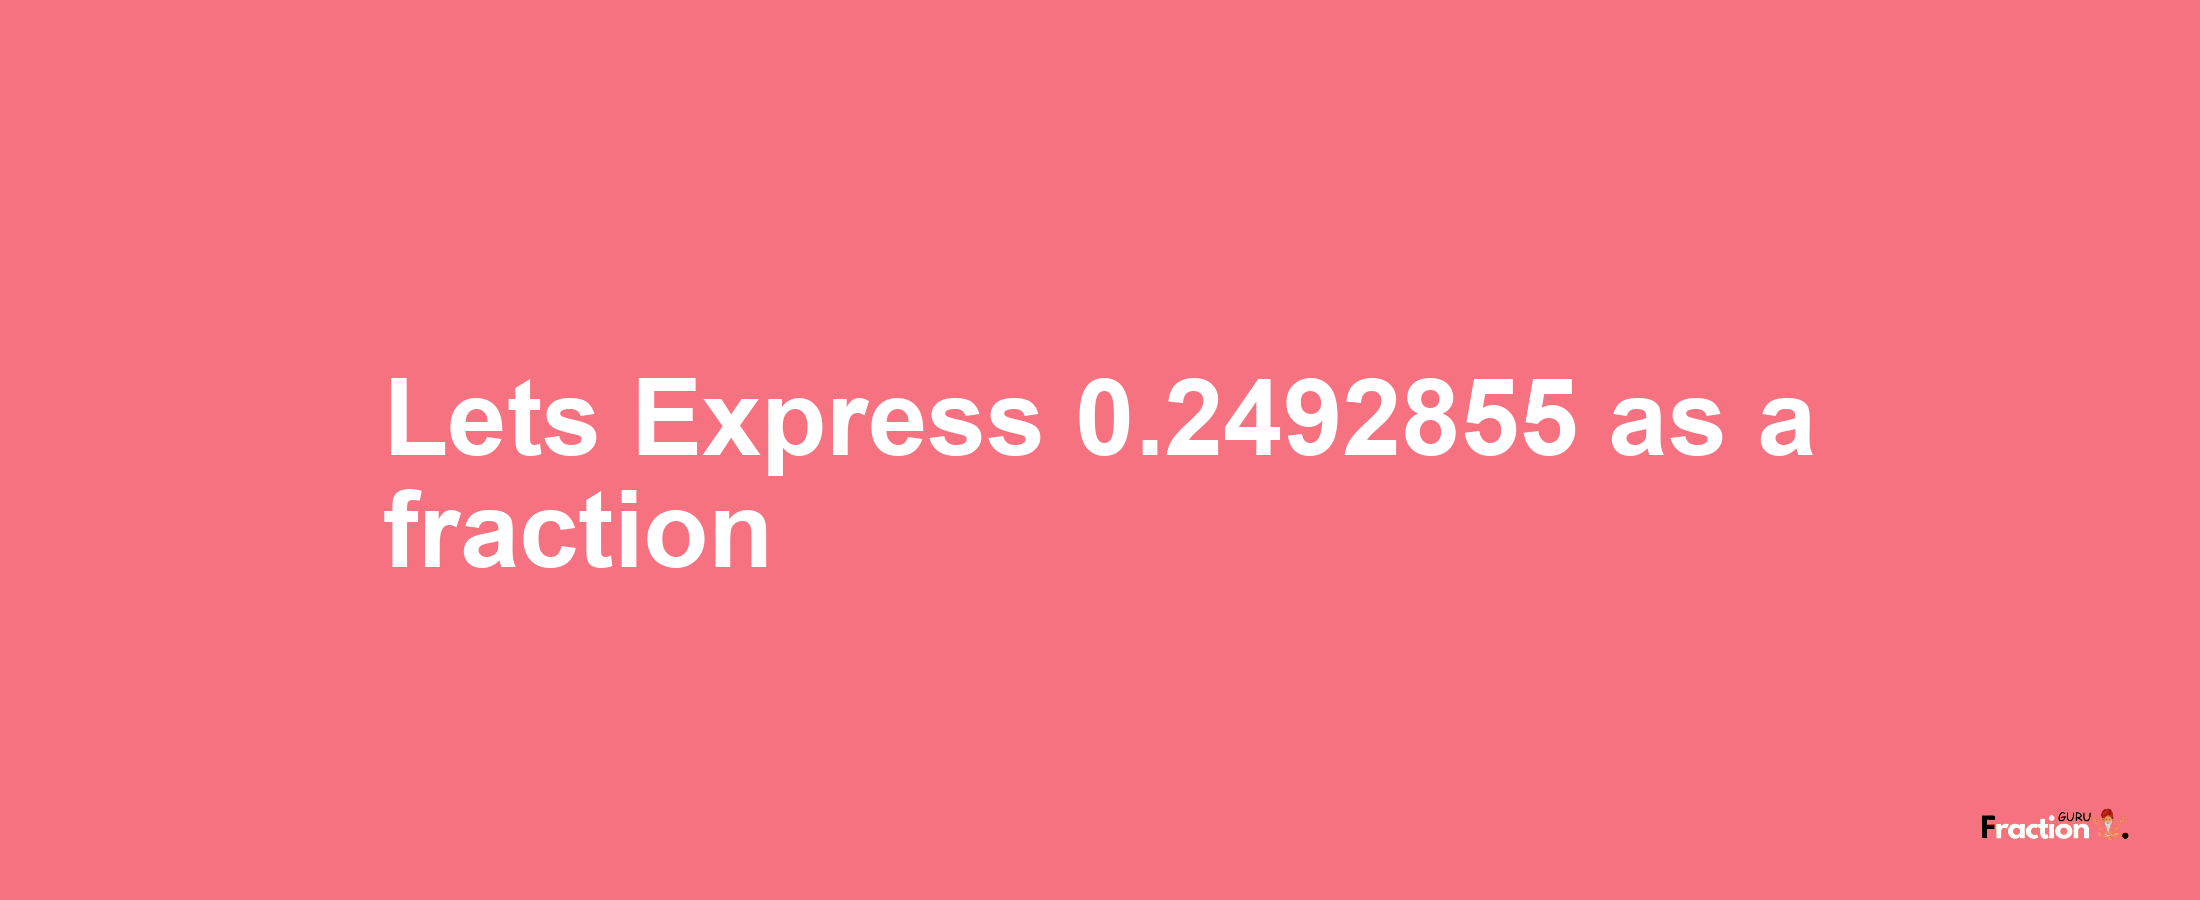 Lets Express 0.2492855 as afraction